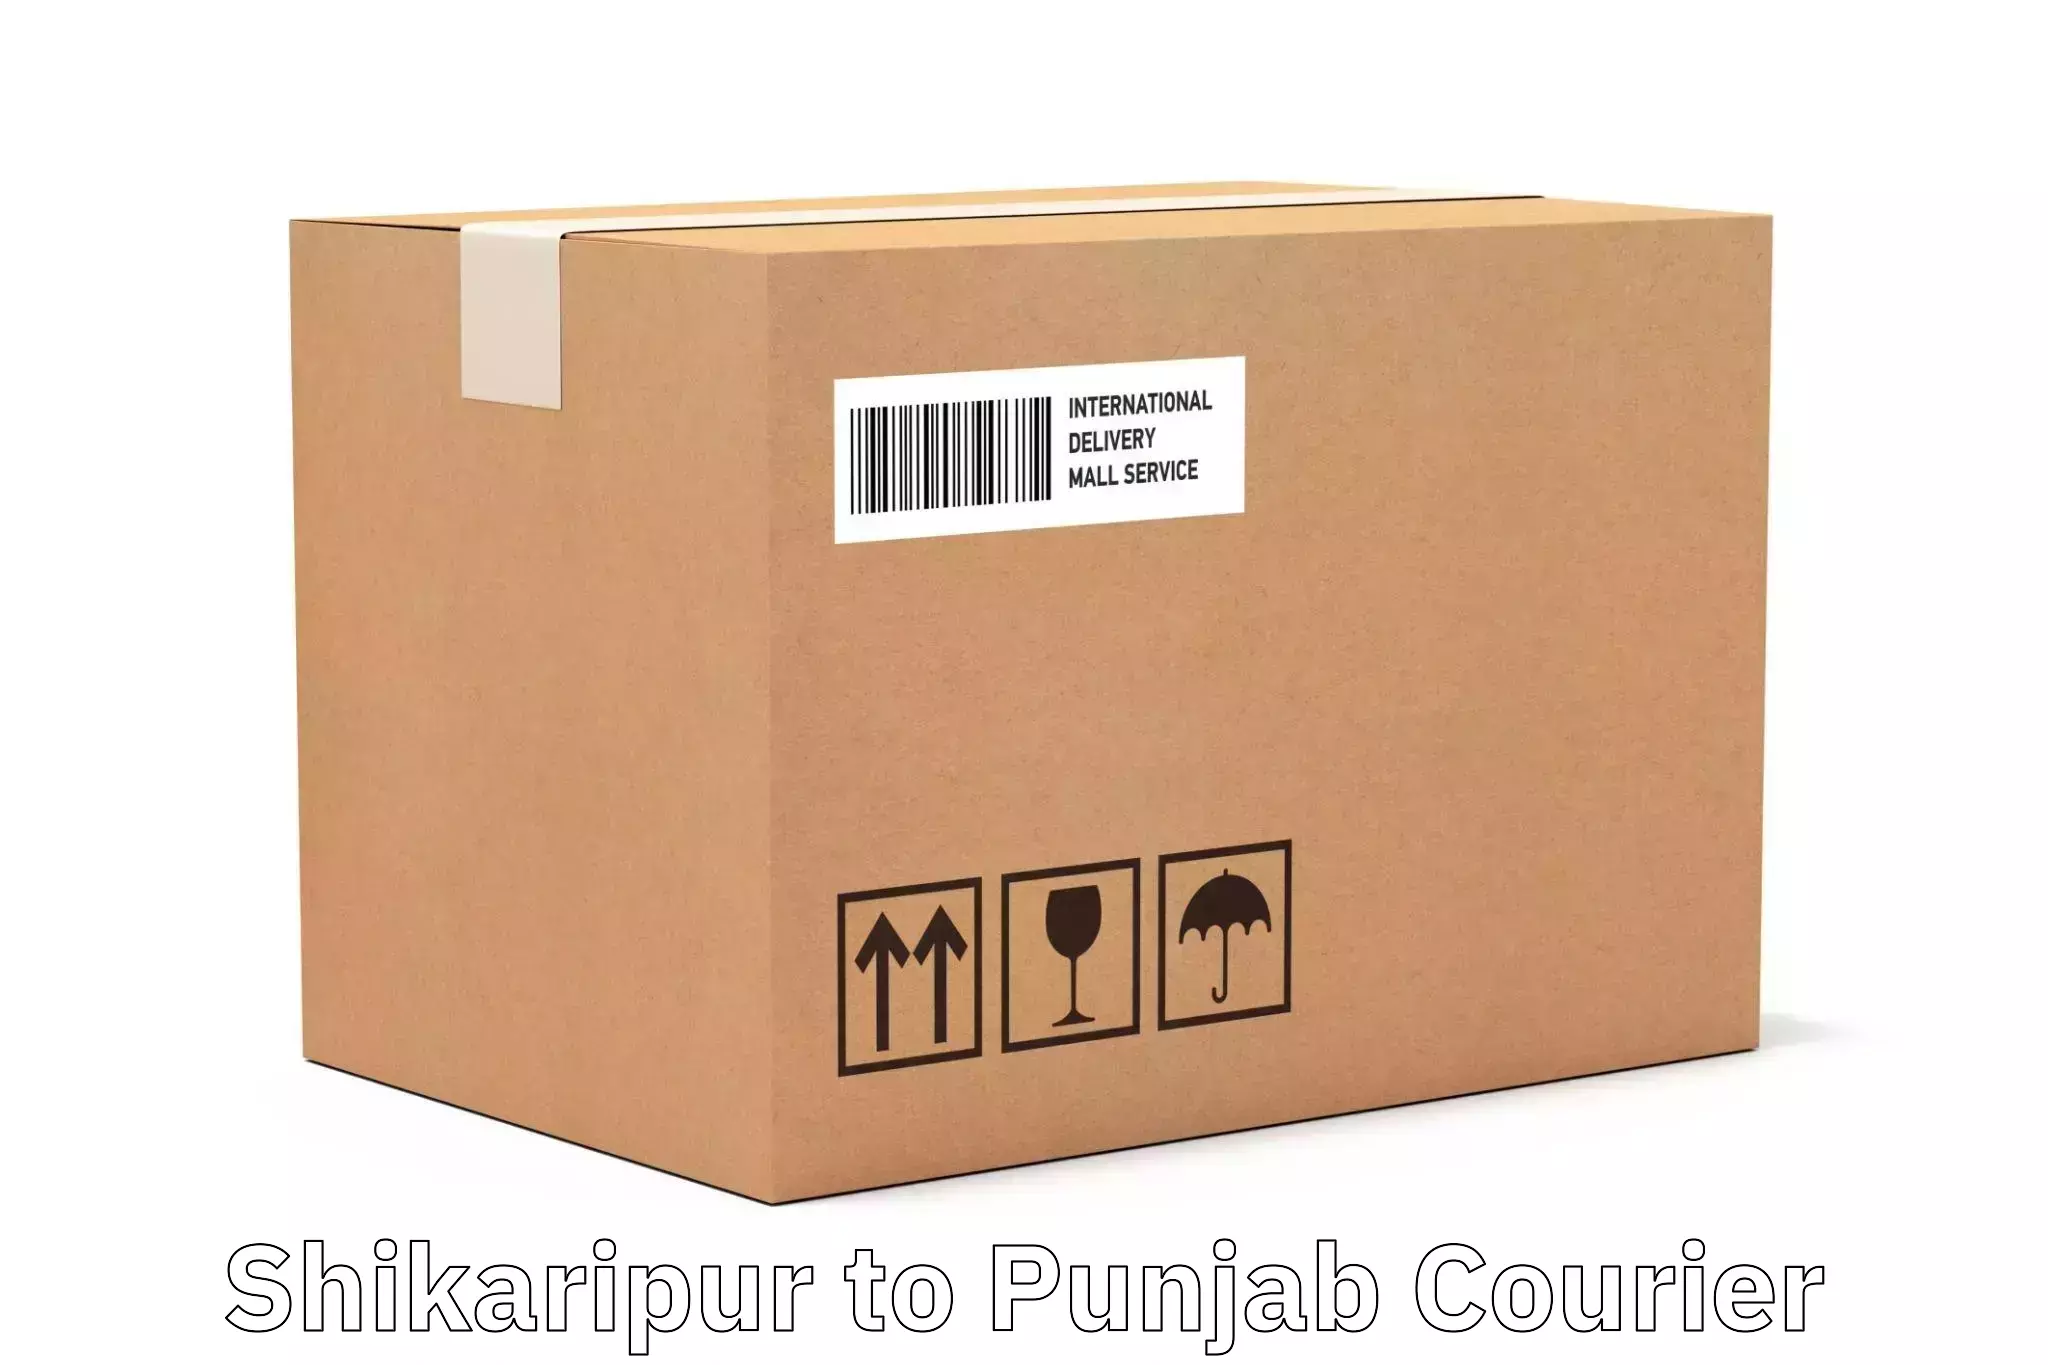 Personal parcel delivery Shikaripur to Amritsar